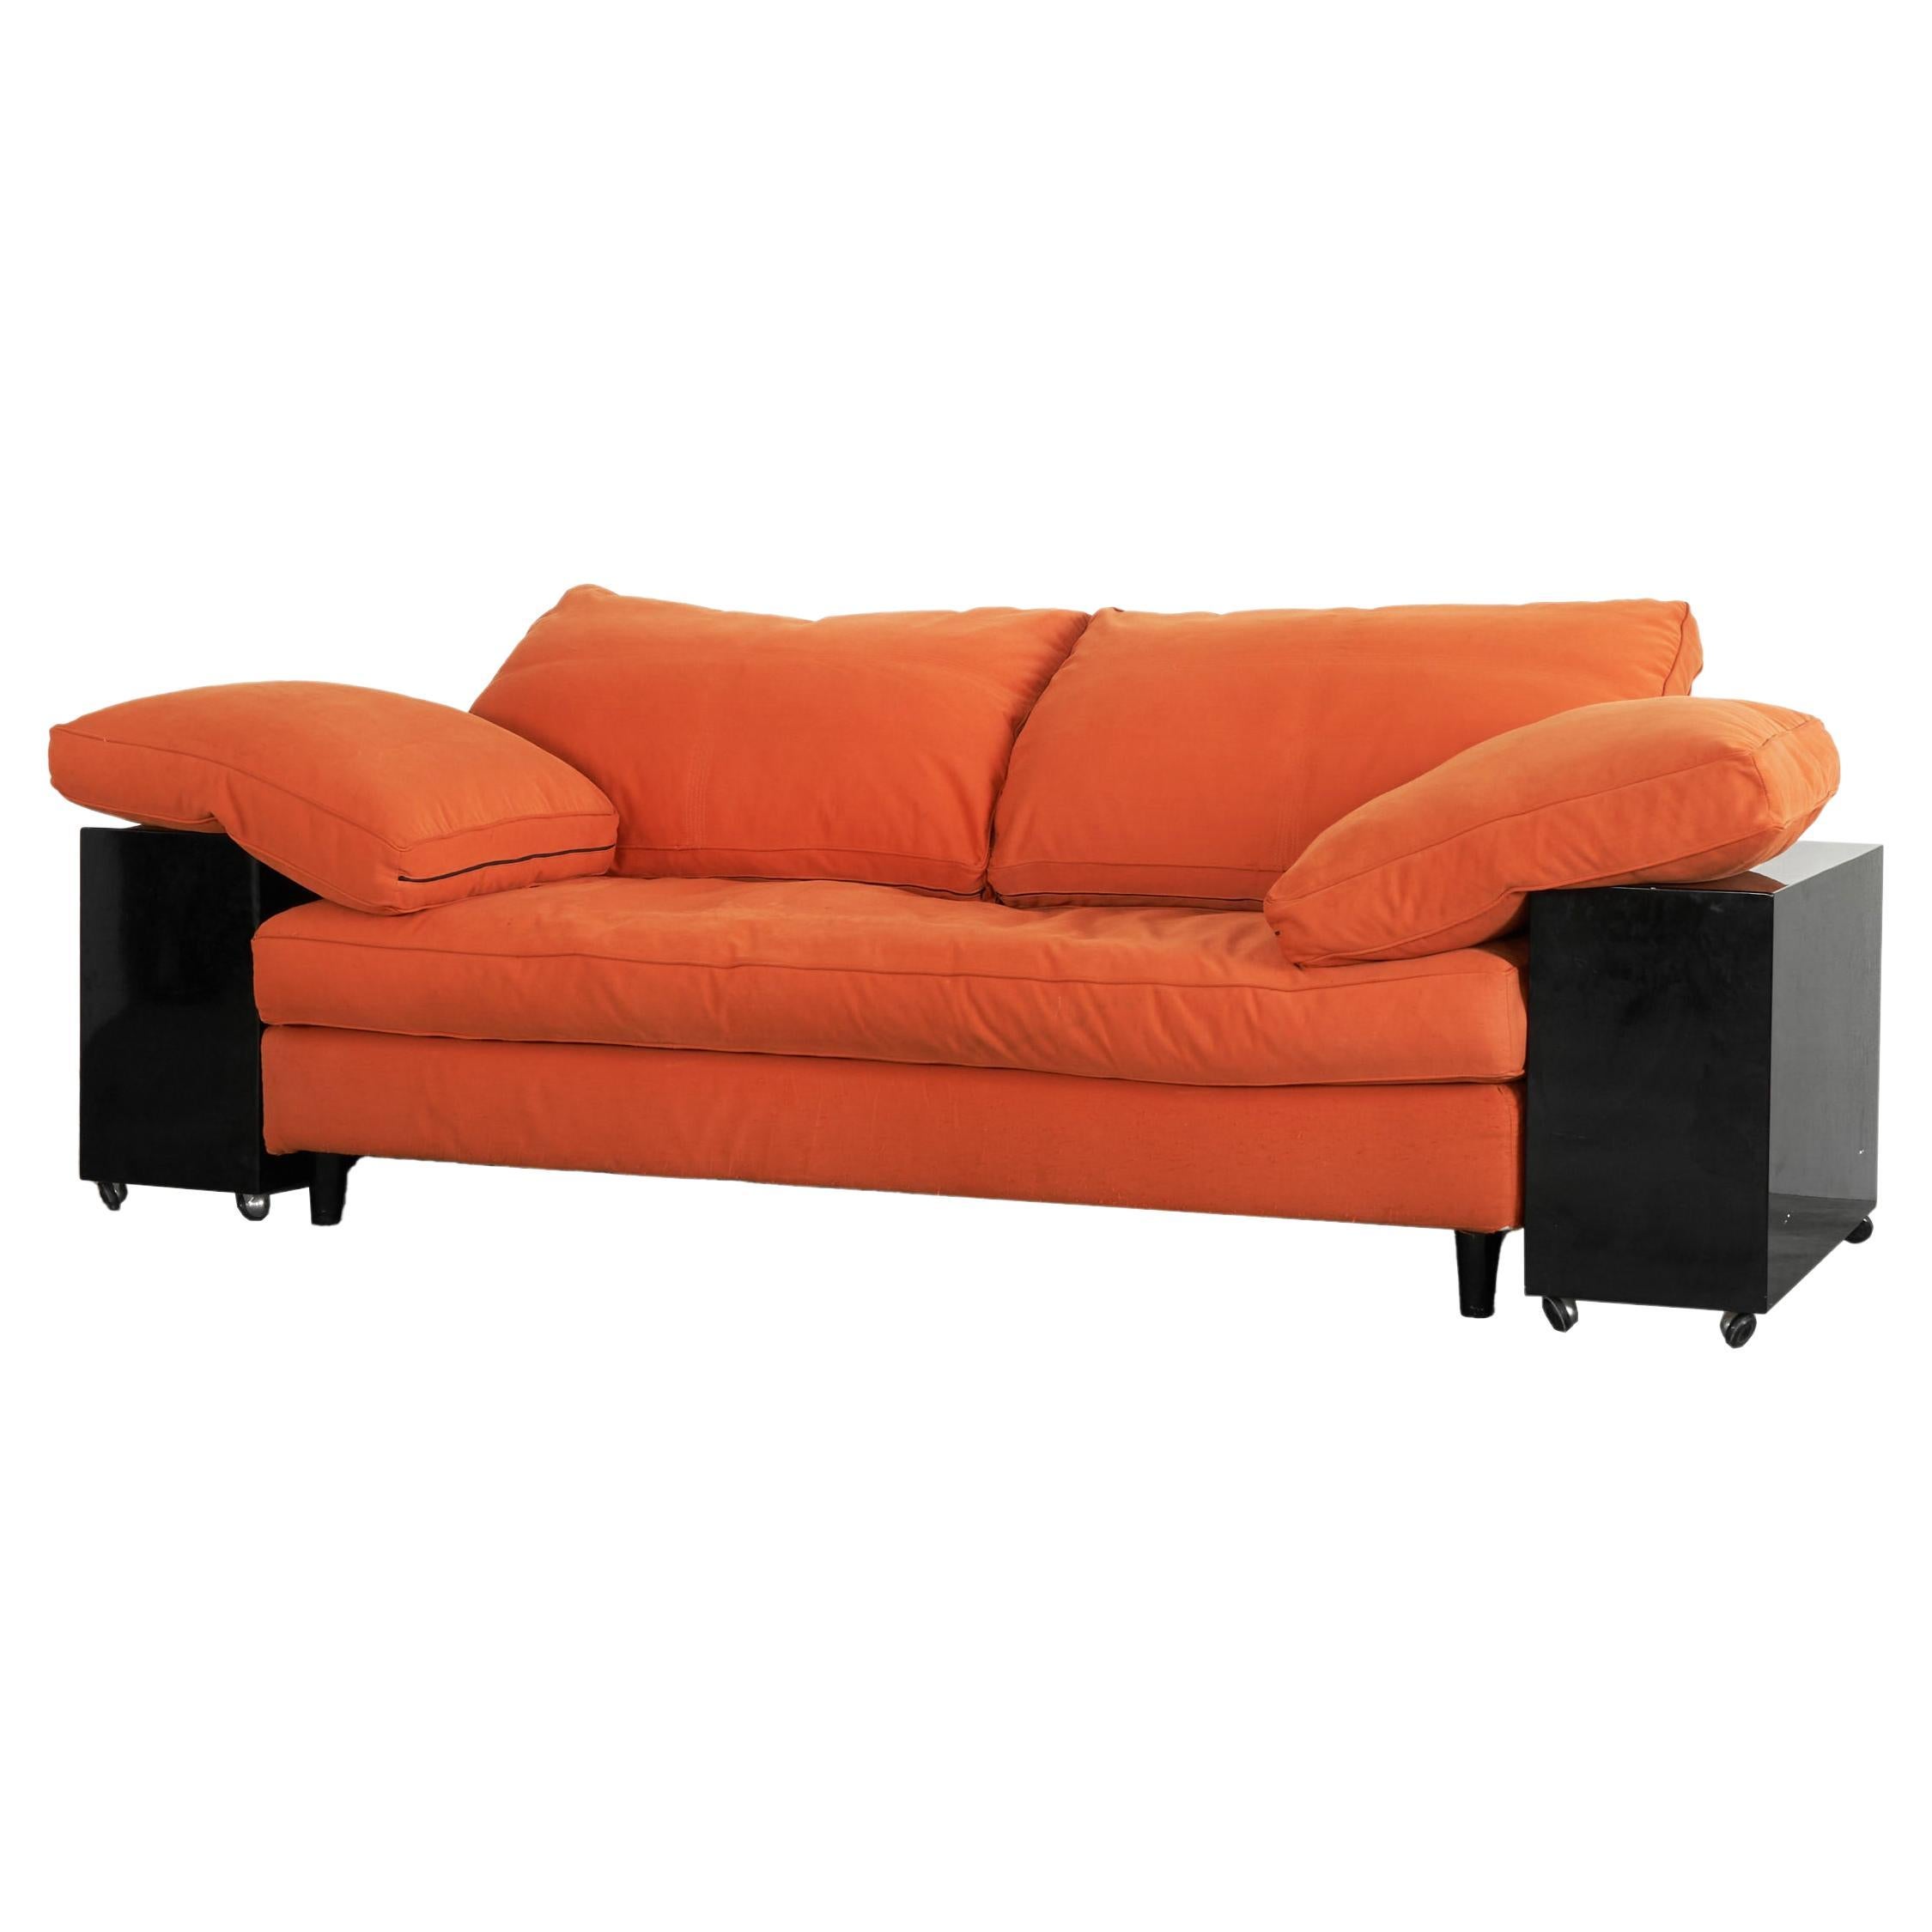 Eileen Gray 'Lota' Sofa in Black Lacquer and Orange Fabric 1980s For Sale